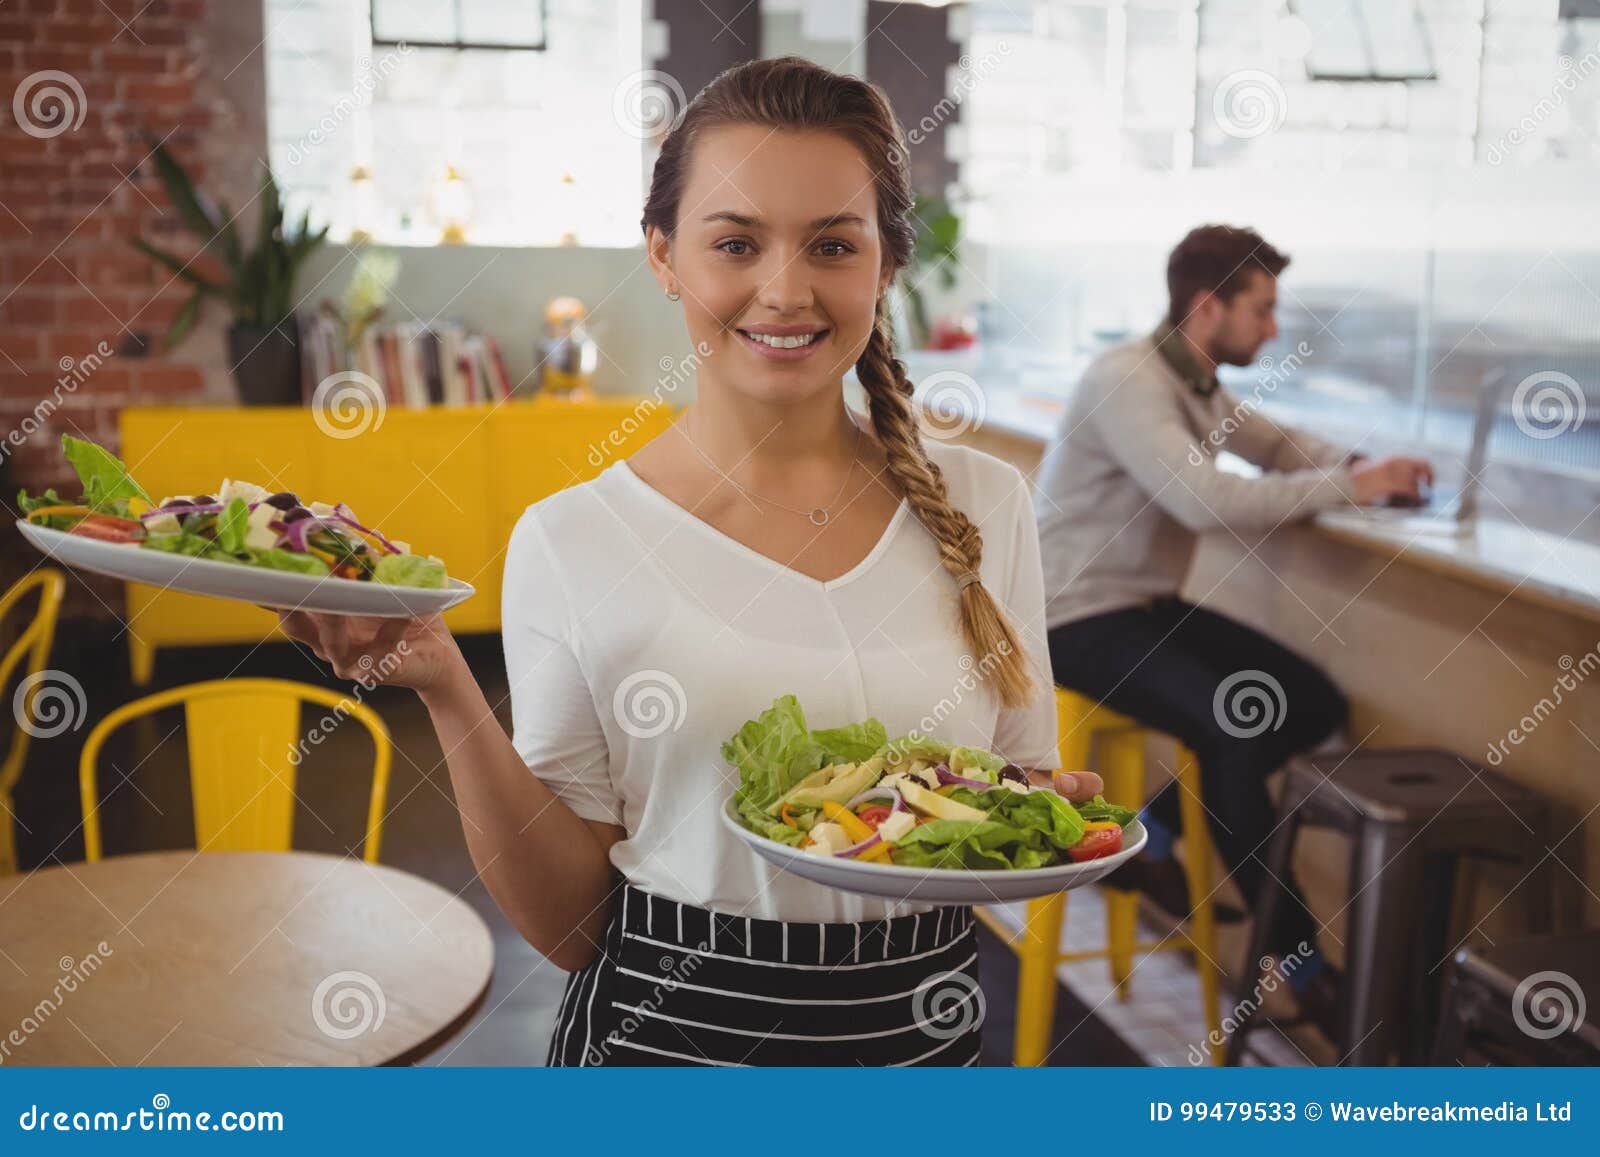 portrait of waitress holding plates with salad while businessman using laptop